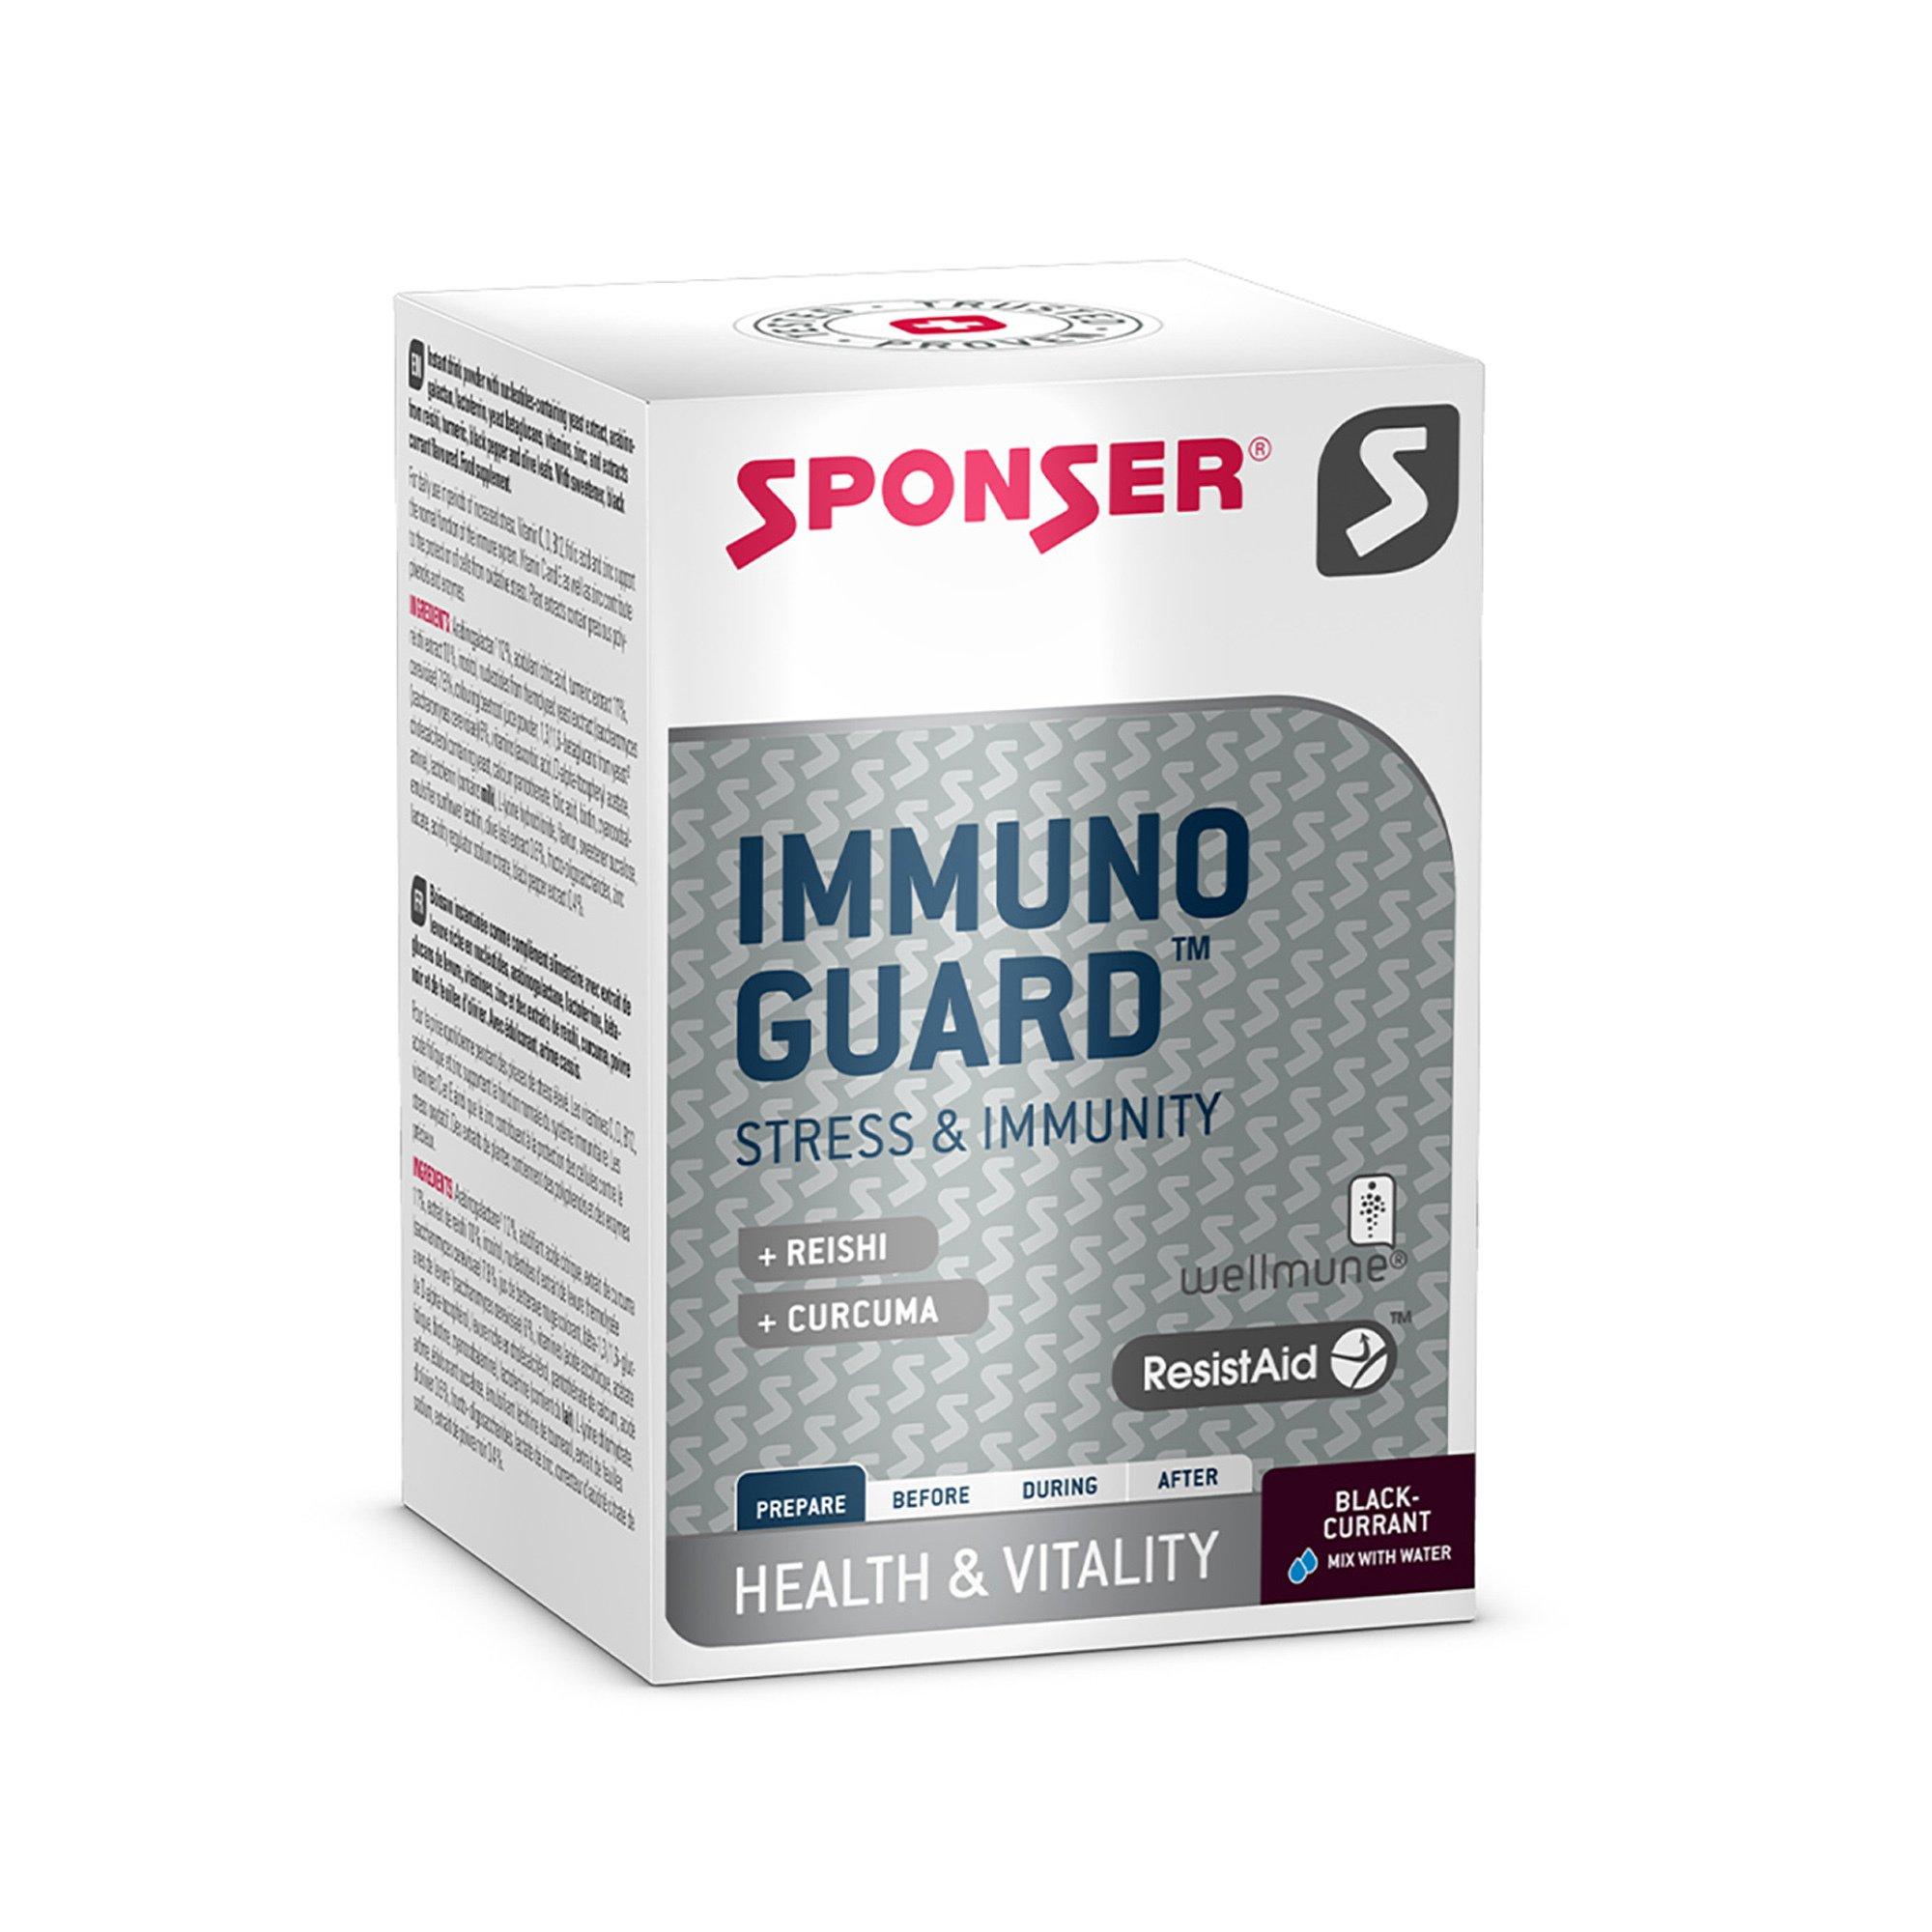 SPONSER Immuno Guard Ribes nero Polvere Fit & Well 